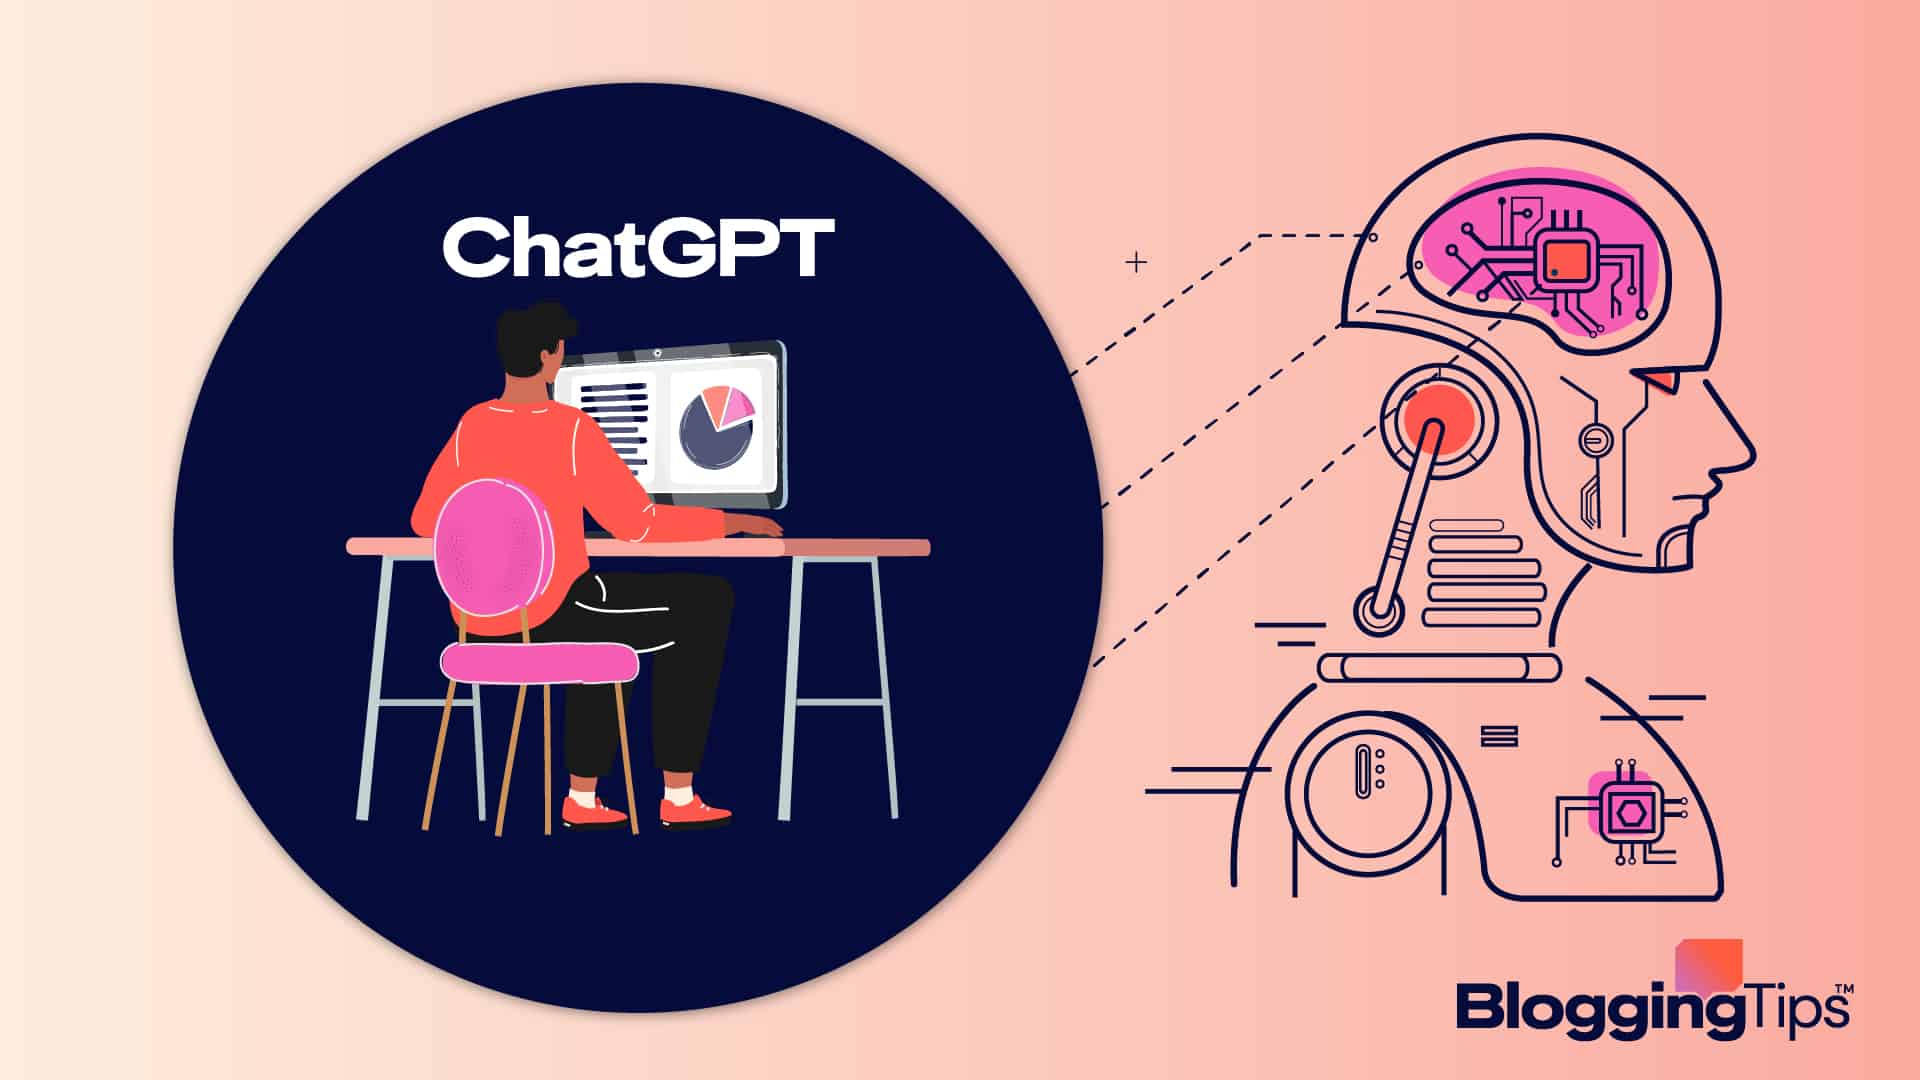 vector graphic showing an illustration of learning how does chatgpt work